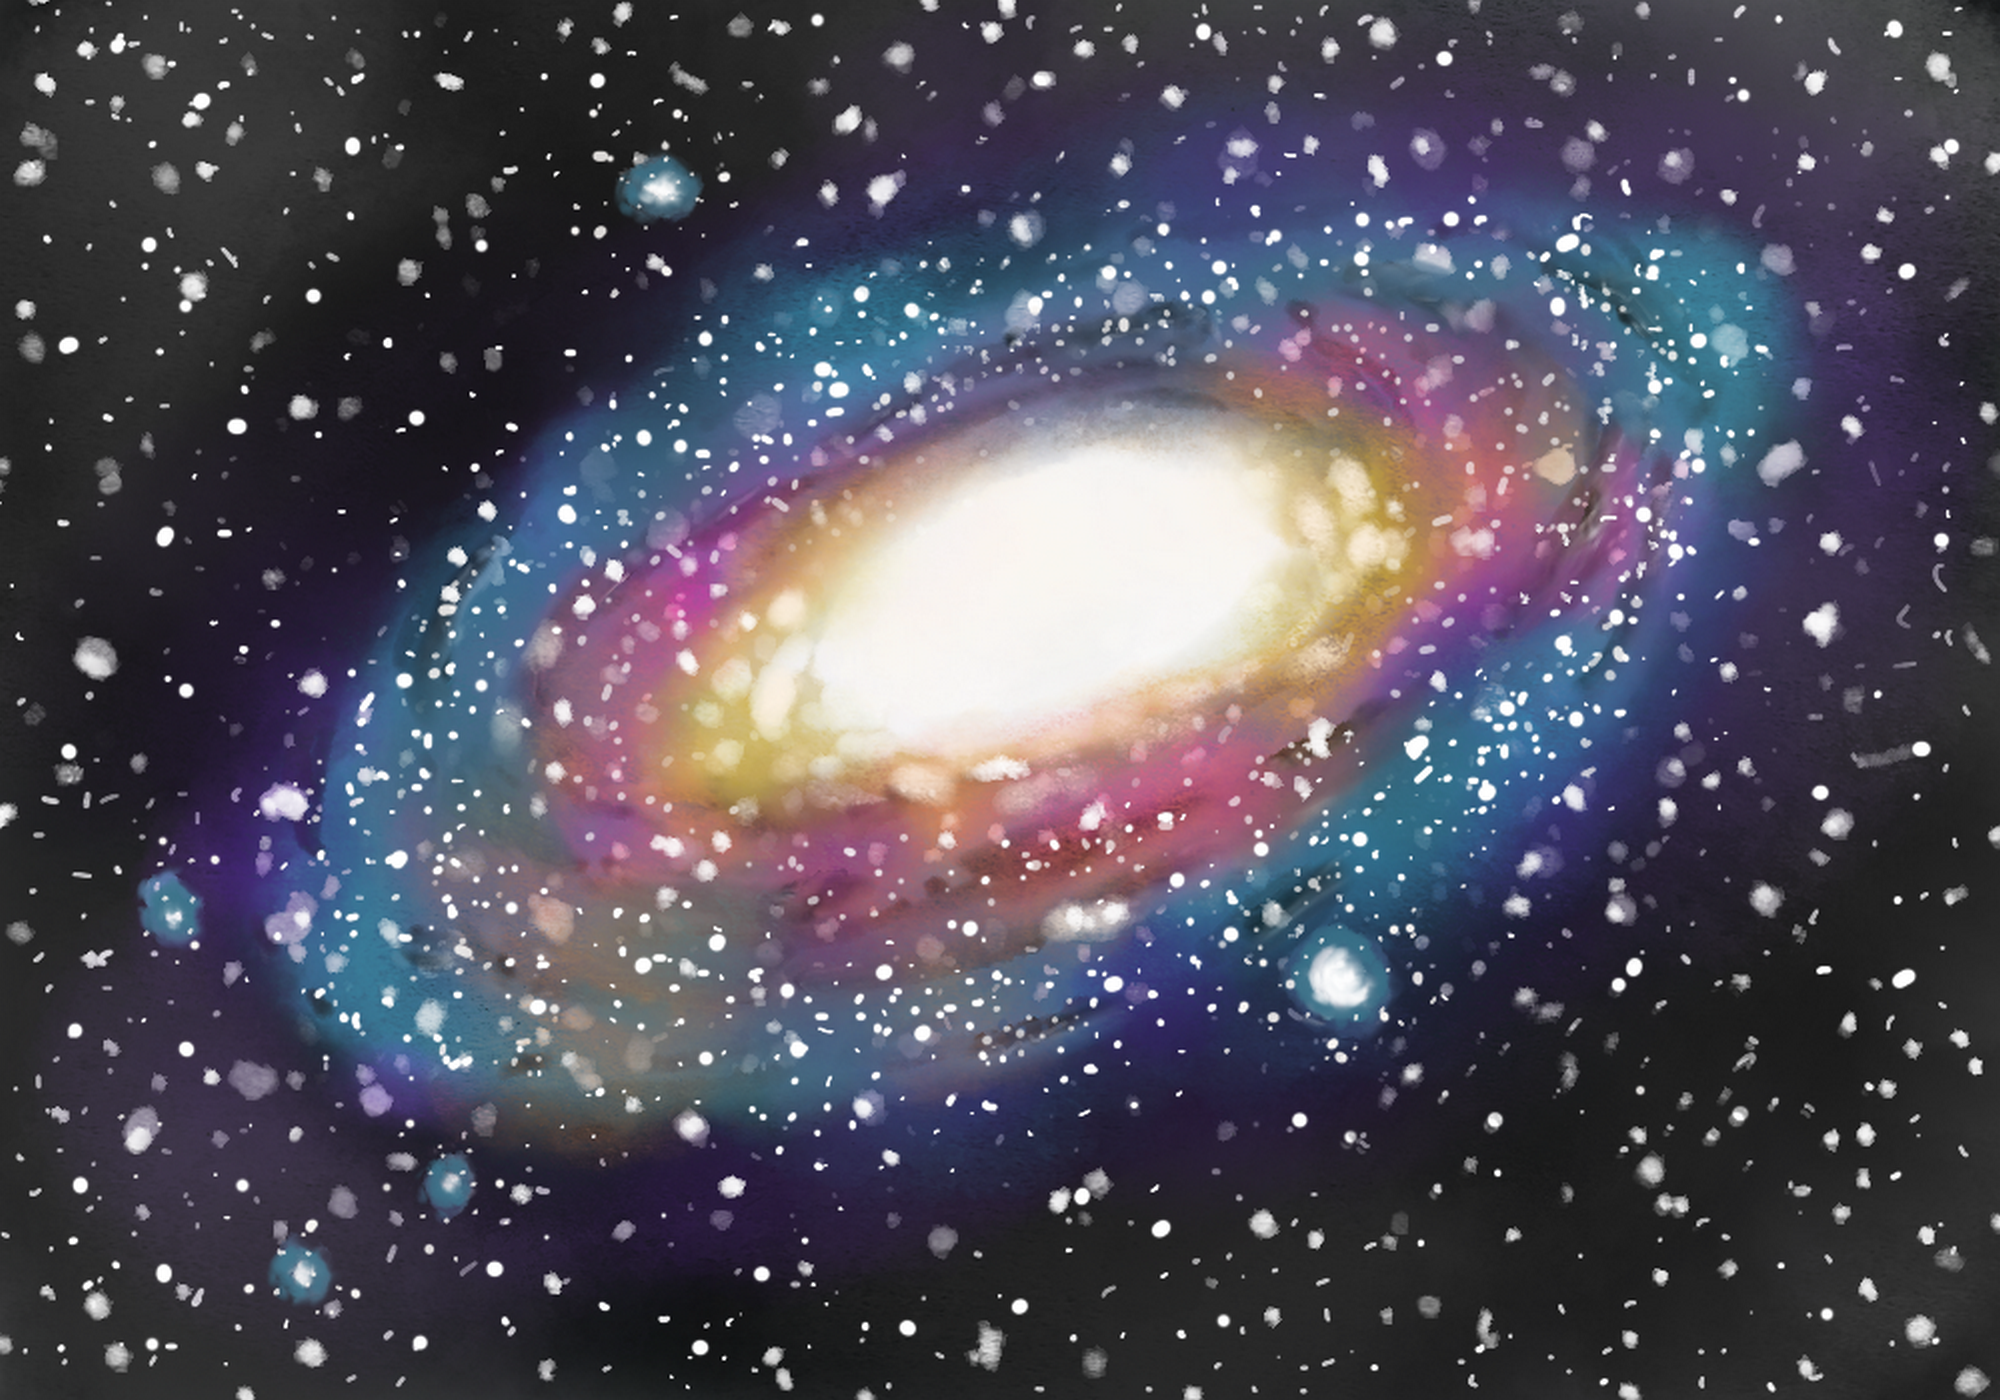 File:Galaxy, artist view - Galaxie, vue d'artiste.png - Wikimedia Commons